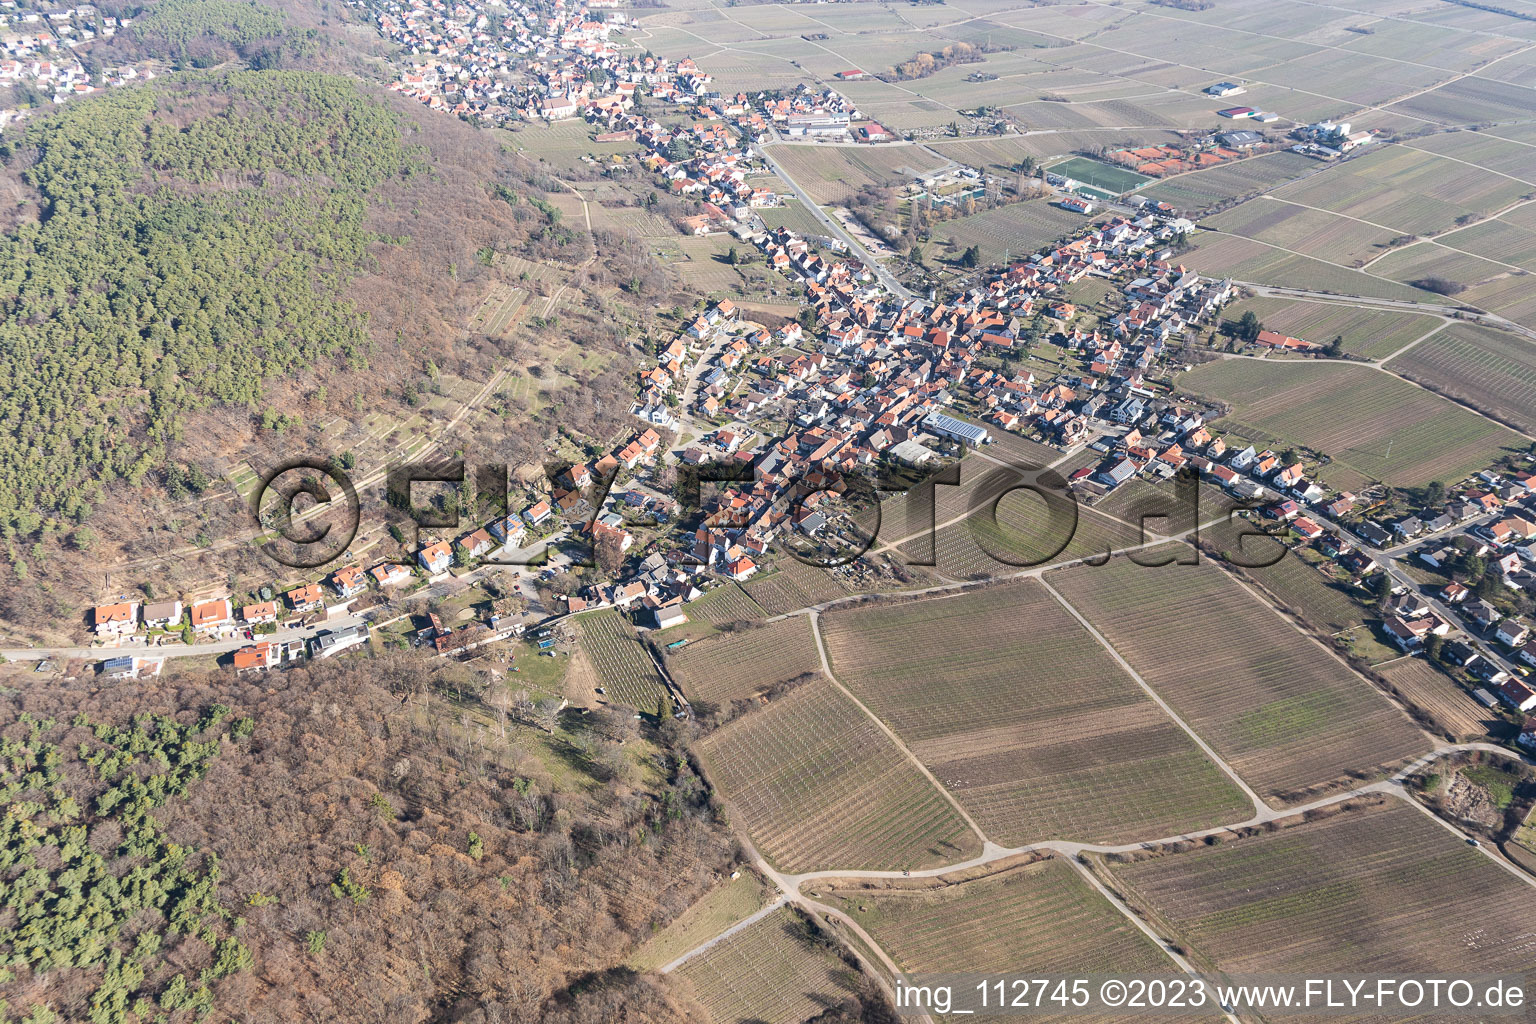 District Hambach an der Weinstraße in Neustadt an der Weinstraße in the state Rhineland-Palatinate, Germany viewn from the air